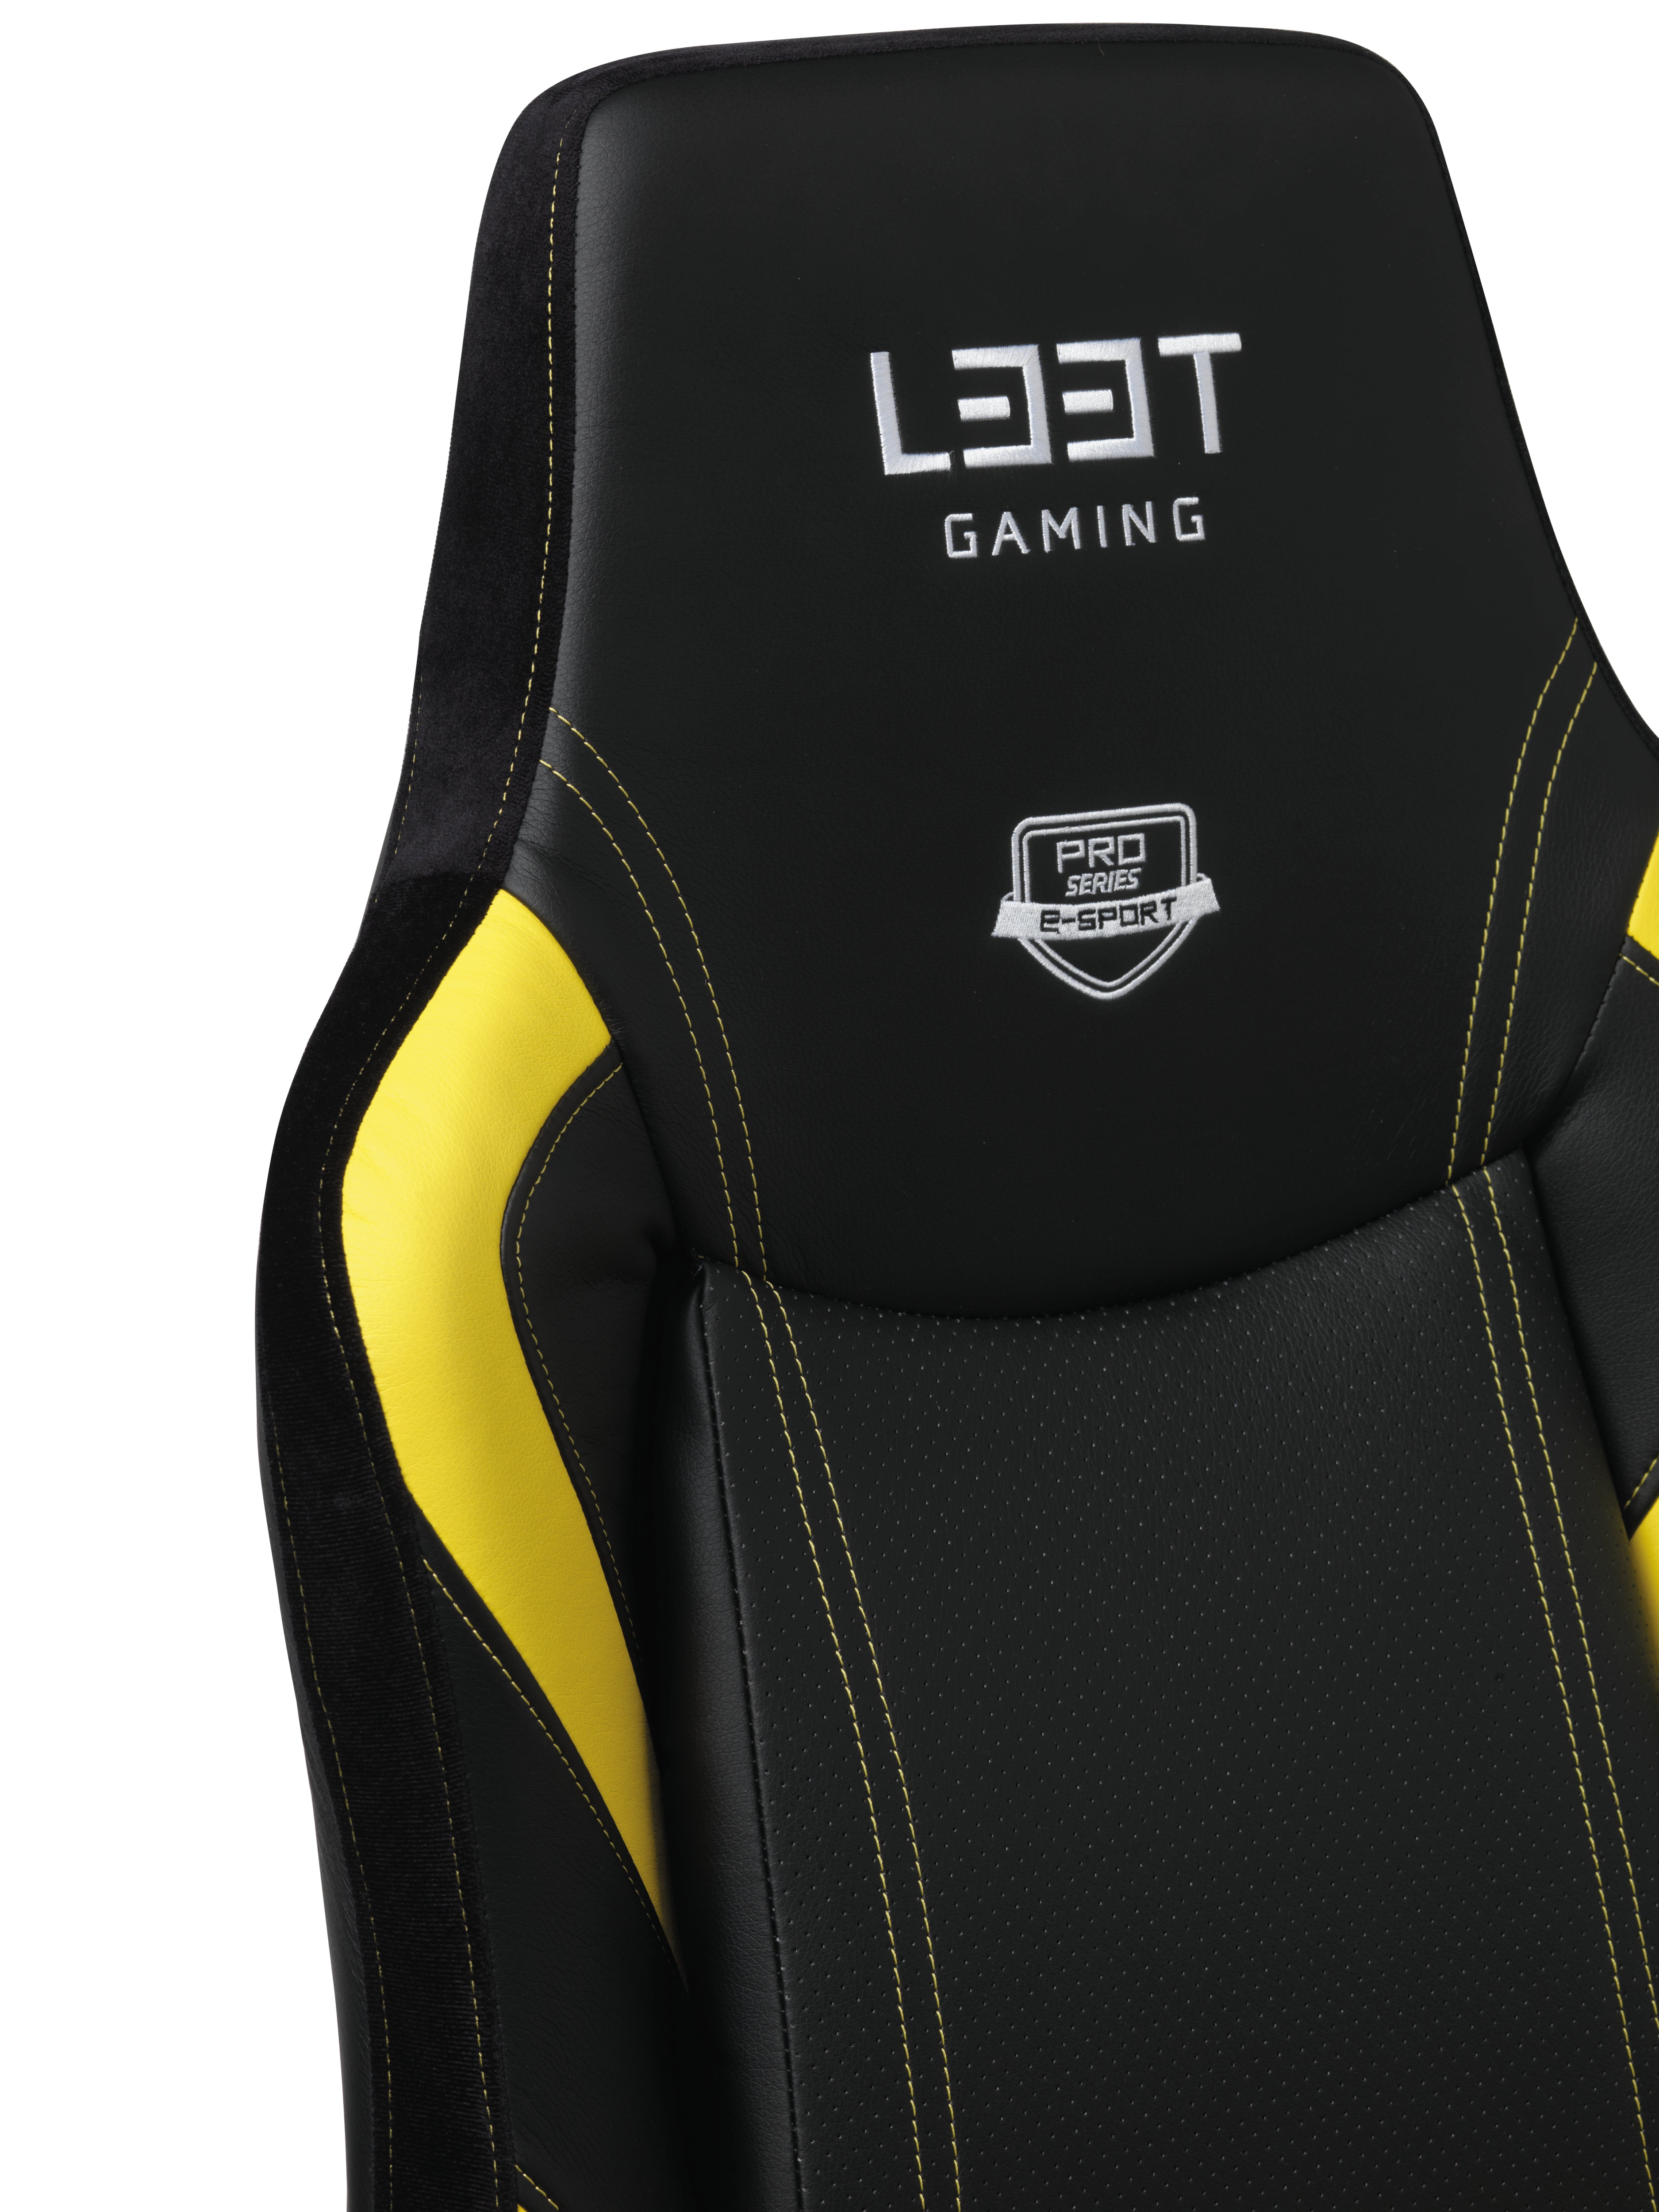 L33T-Gaming E-Sport Pro Excellence PC gamingstol L33T